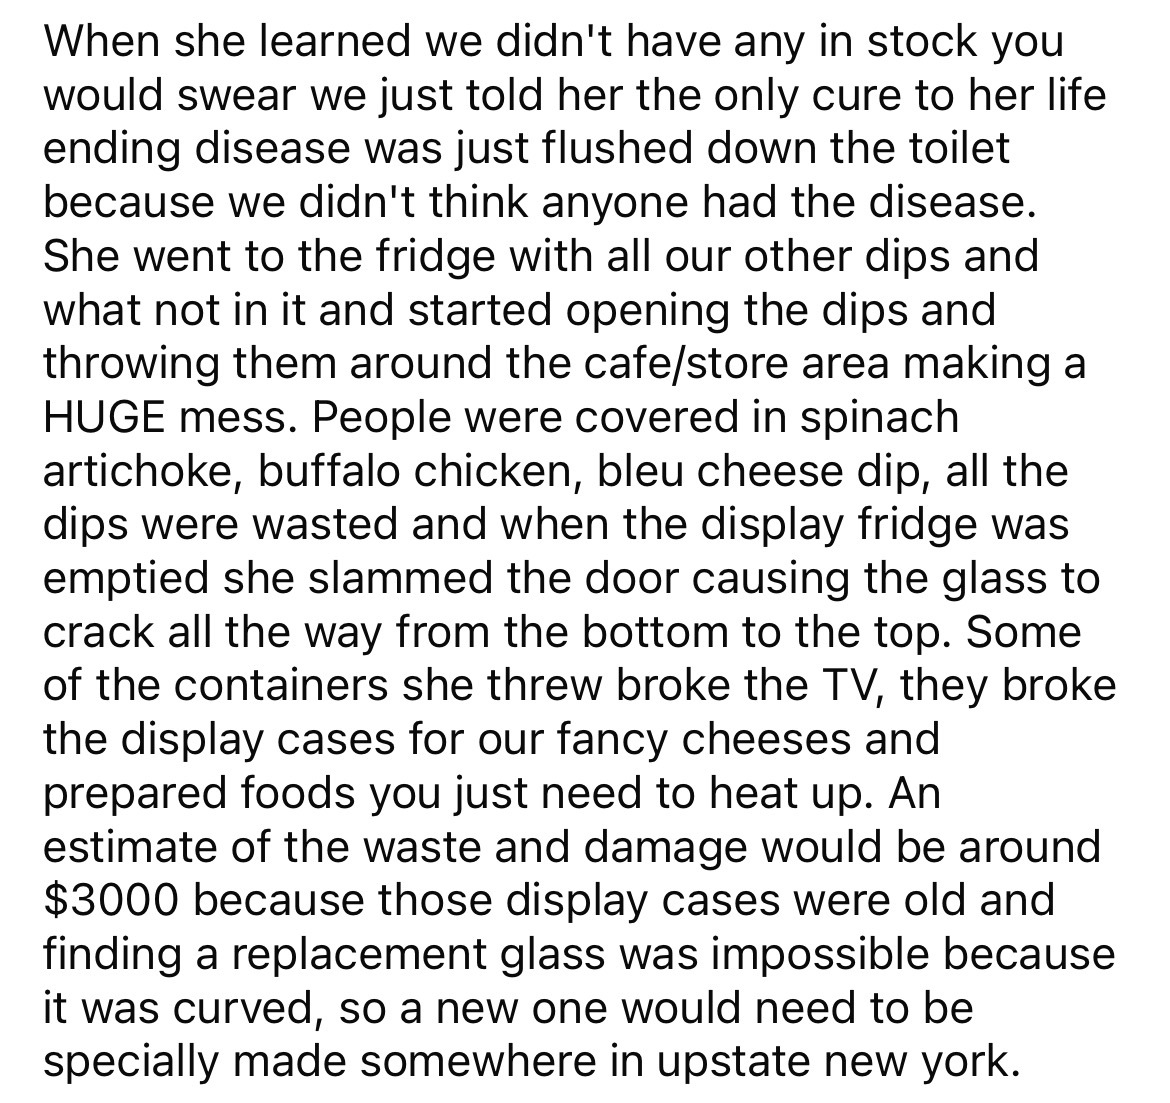 document - When she learned we didn't have any in stock you would swear we just told her the only cure to her life ending disease was just flushed down the toilet because we didn't think anyone had the disease. She went to the fridge with all our other di